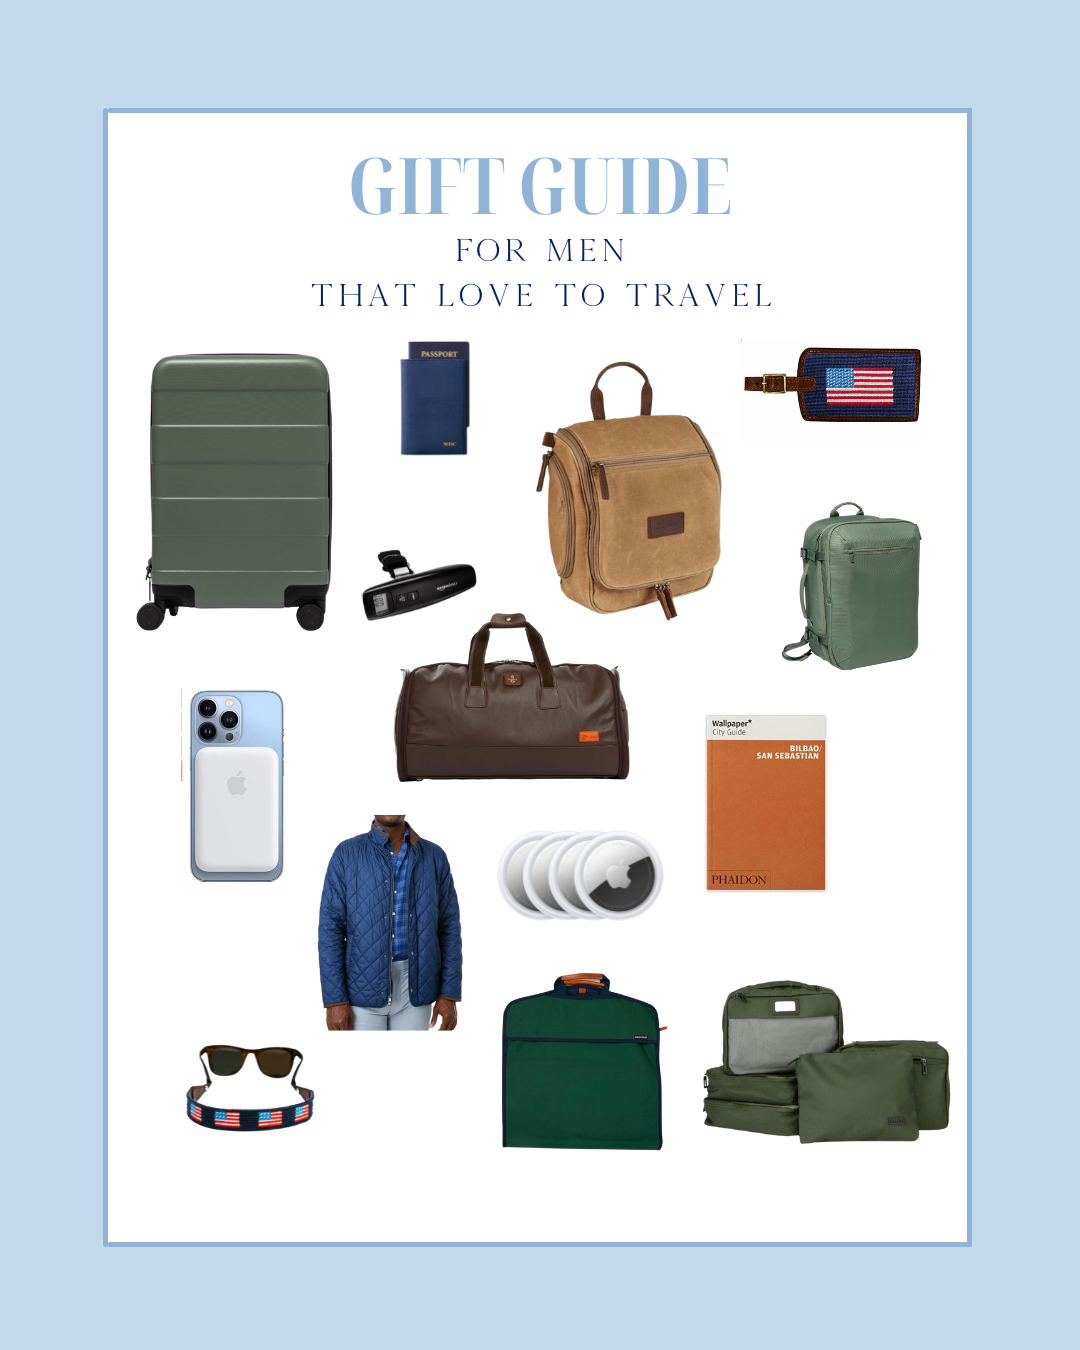 Gifts for the Traveler (for Women and Men) - Putting Me Together